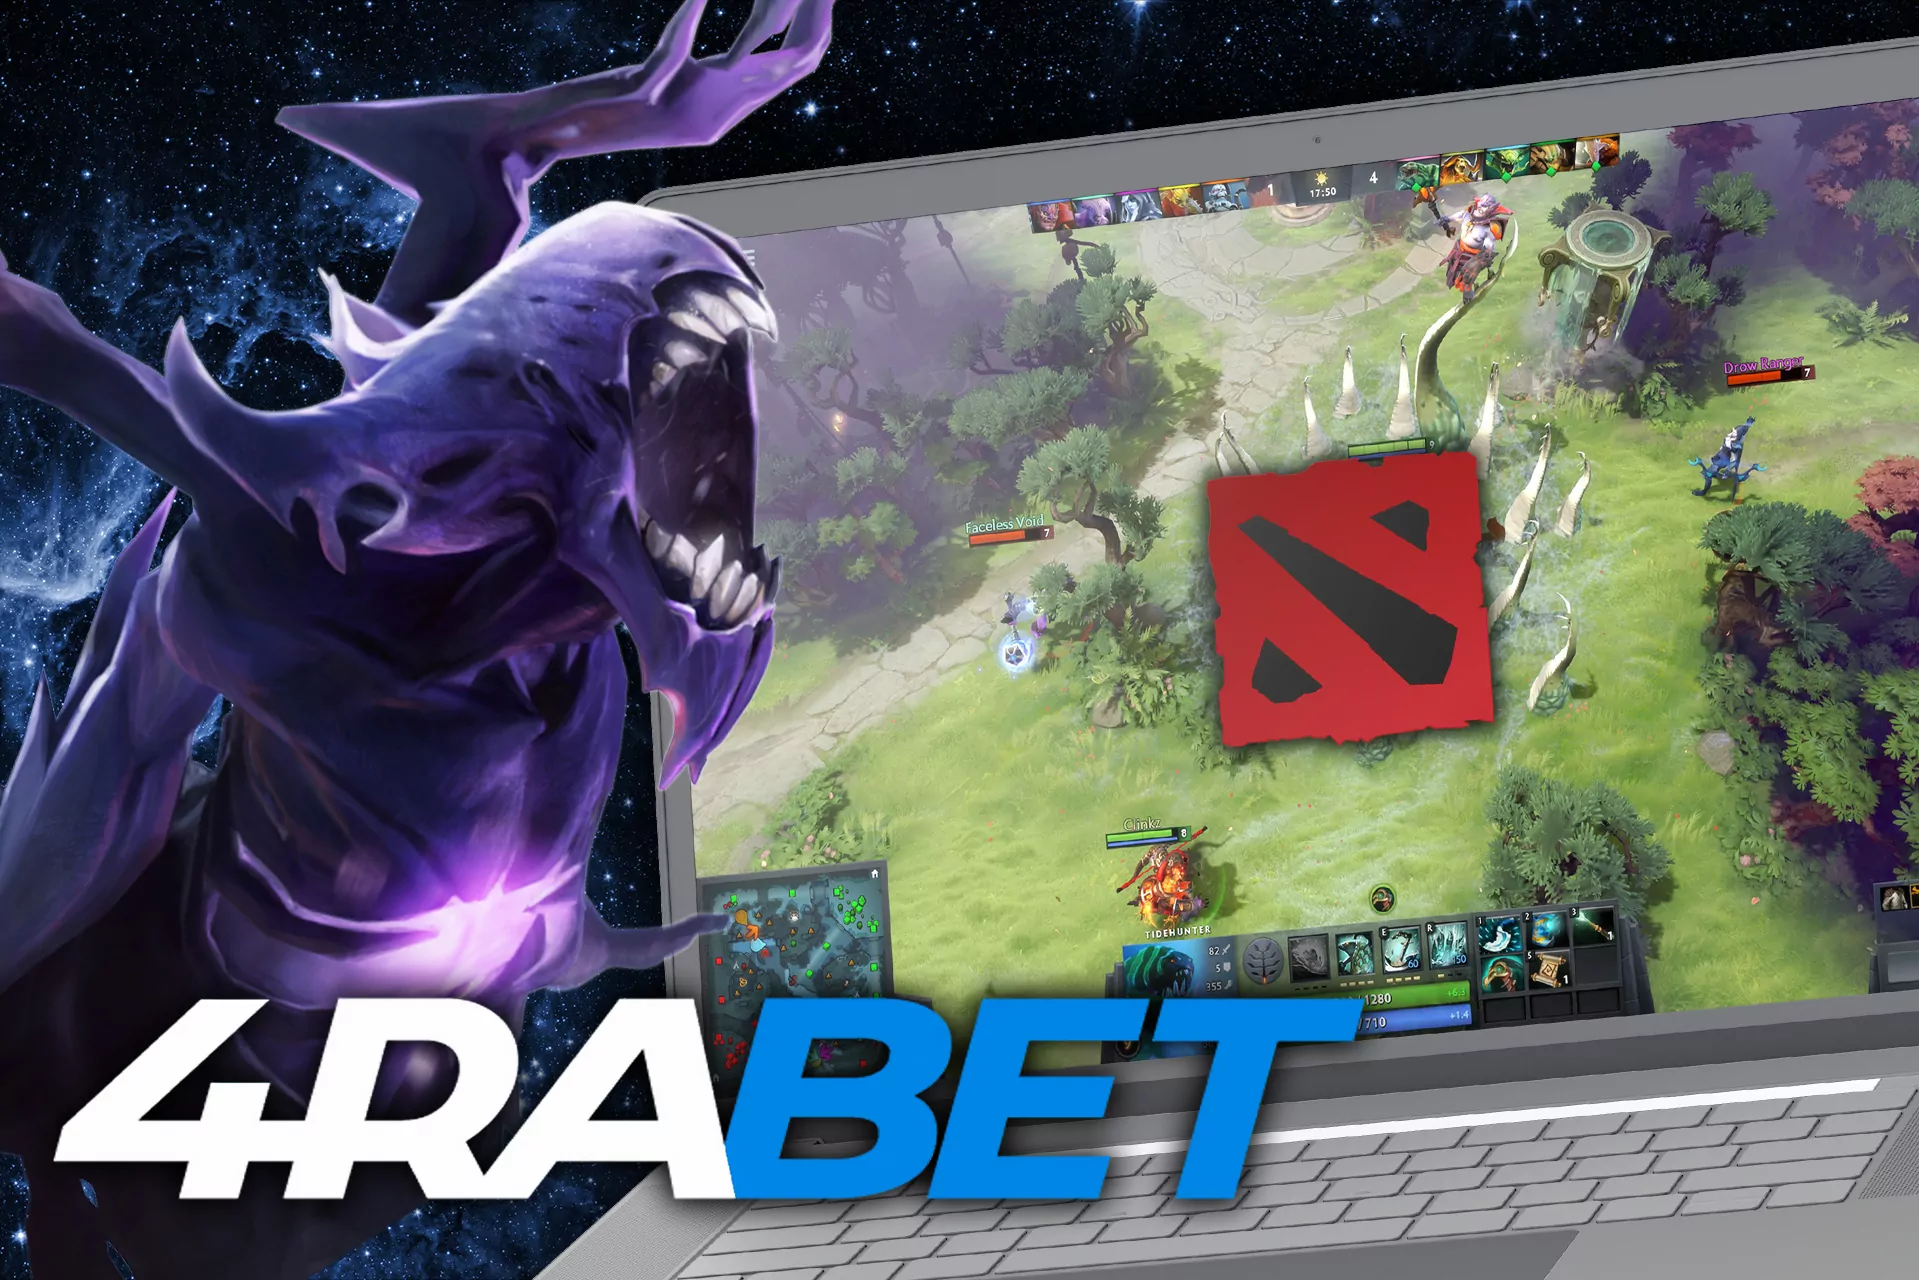 All the Dota 2 lovers can pace bets on it at 4rabet.